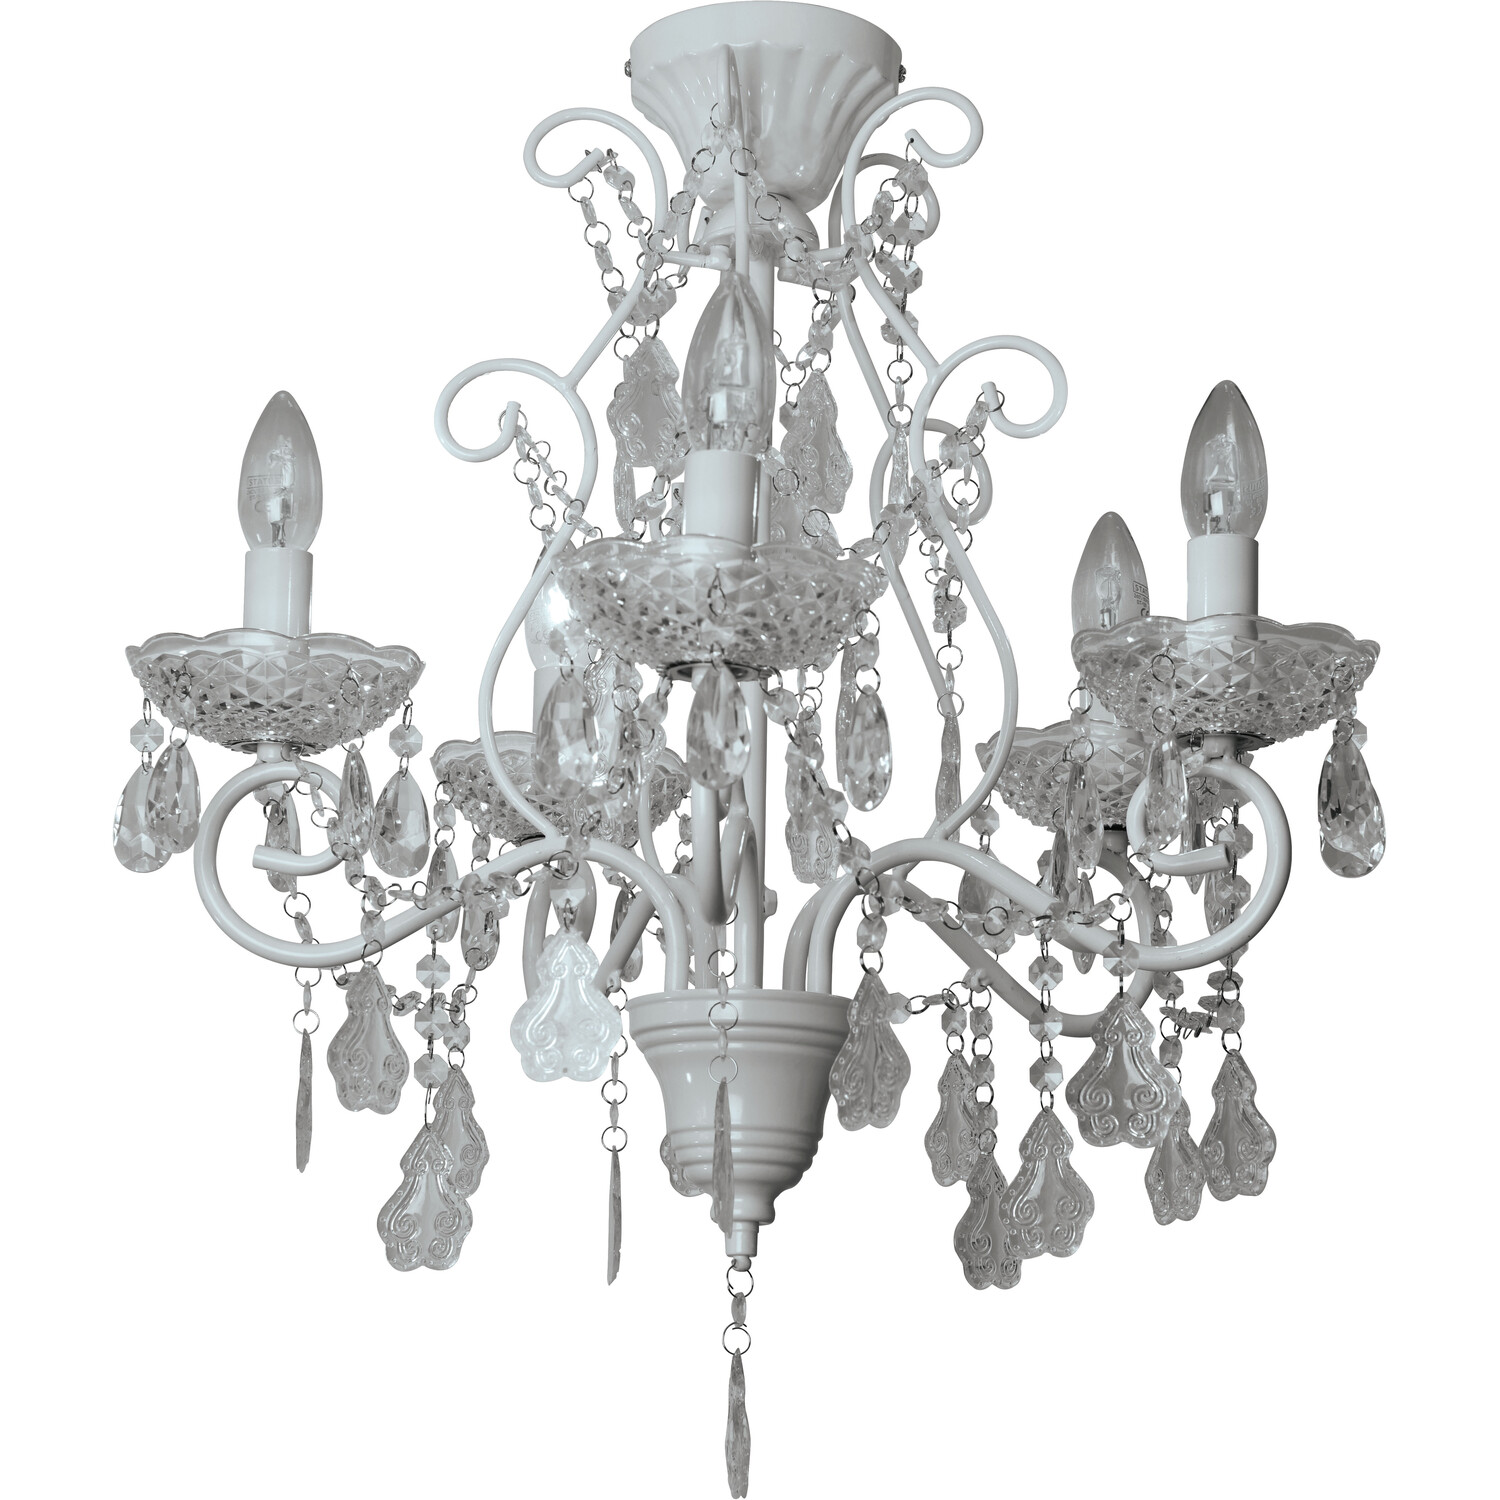 White Antiqued Jewelled Ceiling Chandelier Image 1